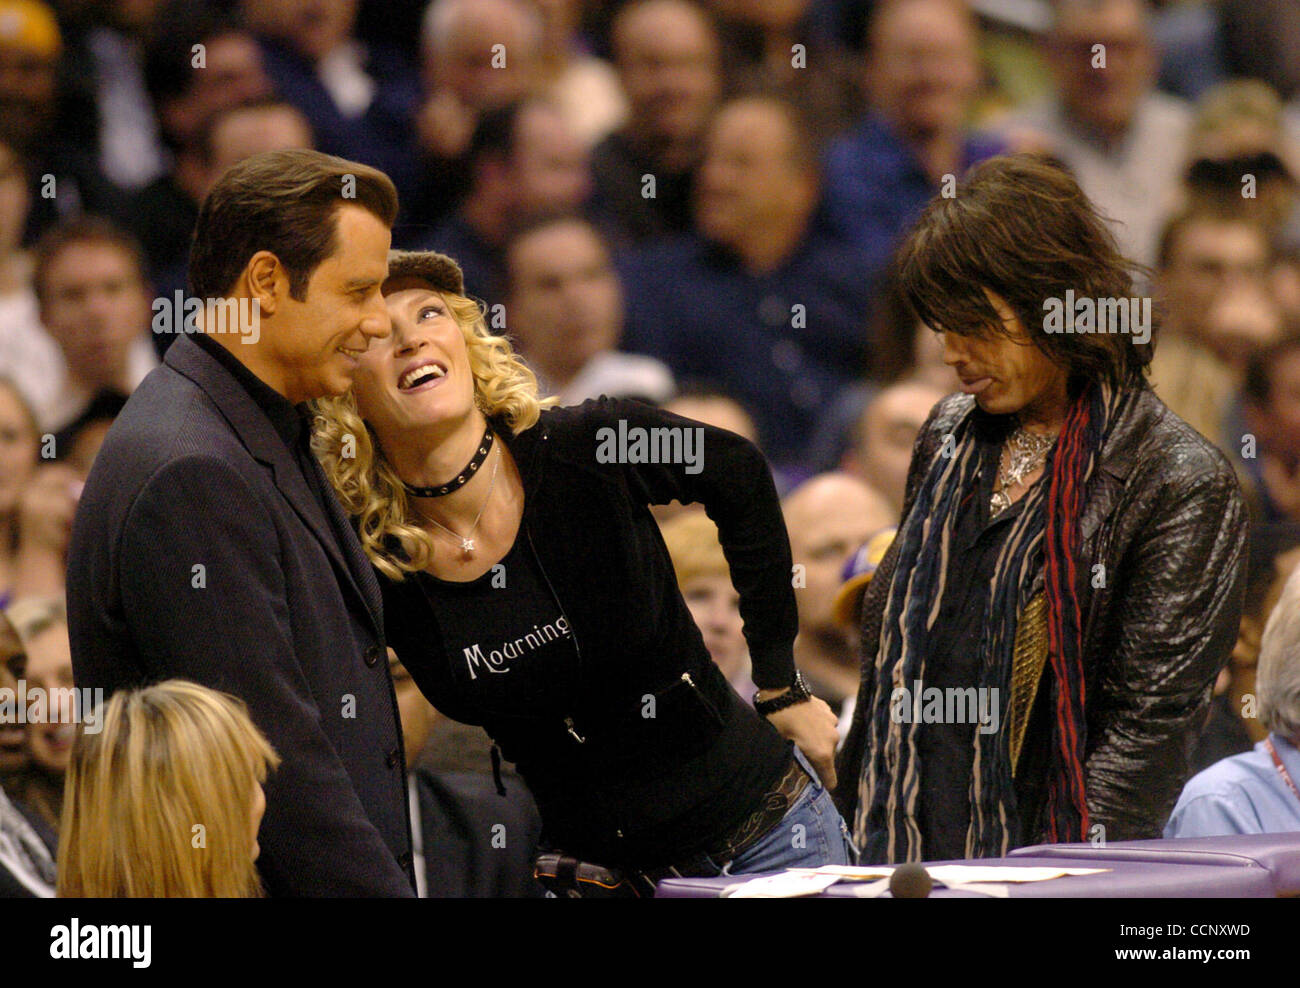 Feb 27, 2004; Los Angeles, CA, USA; Actors JOHN TRAVOLTA, UMA THURMAN and musician STEVEN TYLER of 'Aerosmith' use Staples Center, during a Los Angeles Lakers game against the Sacramento Kings, as their stage while filming the sequel to 'Get Shortie' called 'Be Cool.' This is the first time John and Stock Photo